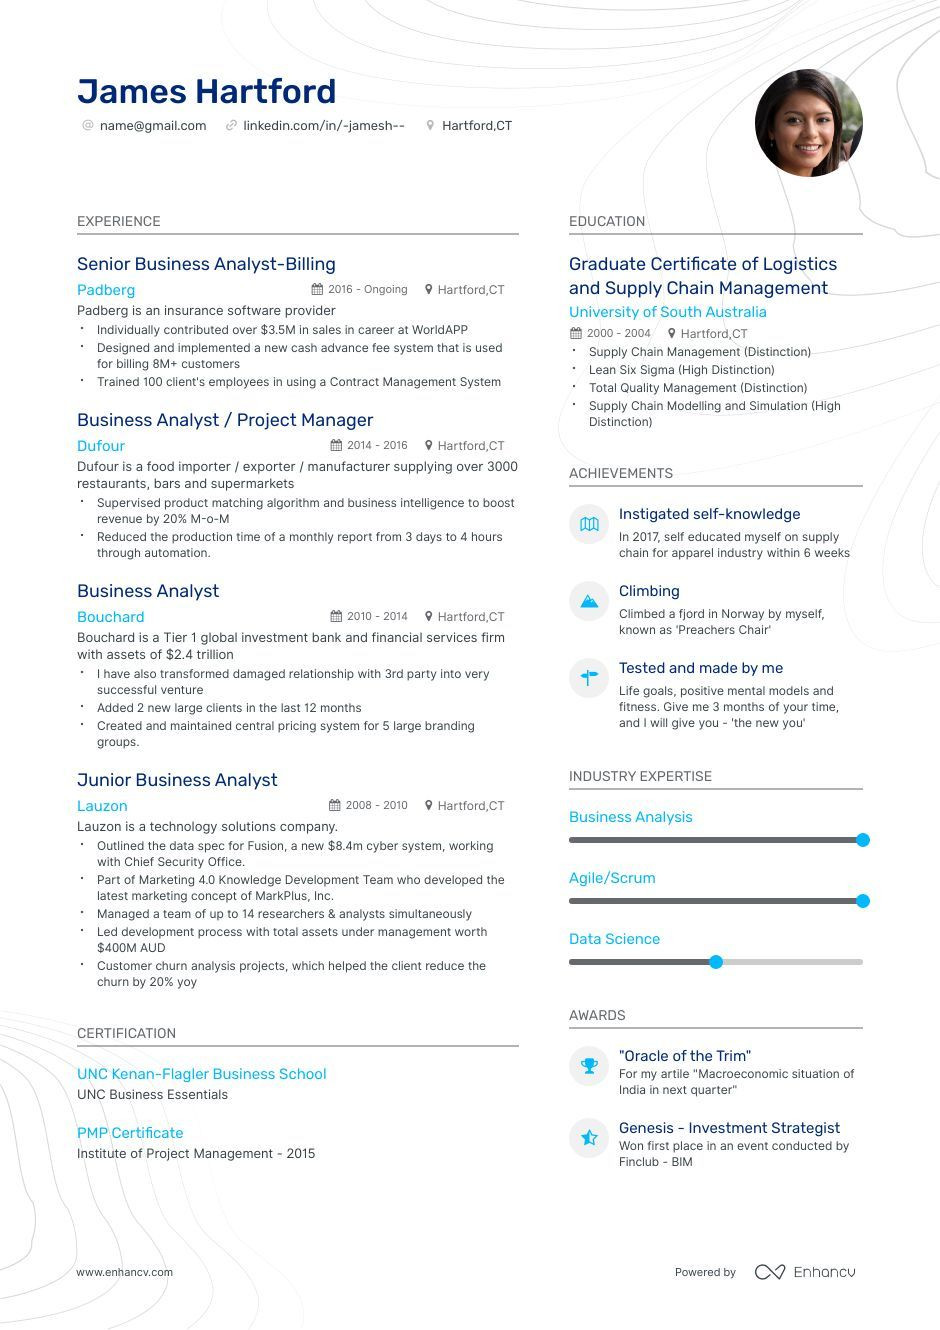 Sample Resume for Junior Business Analyst Position the Best Business Analyst Resume Examples & Guide for 2022 (layout …